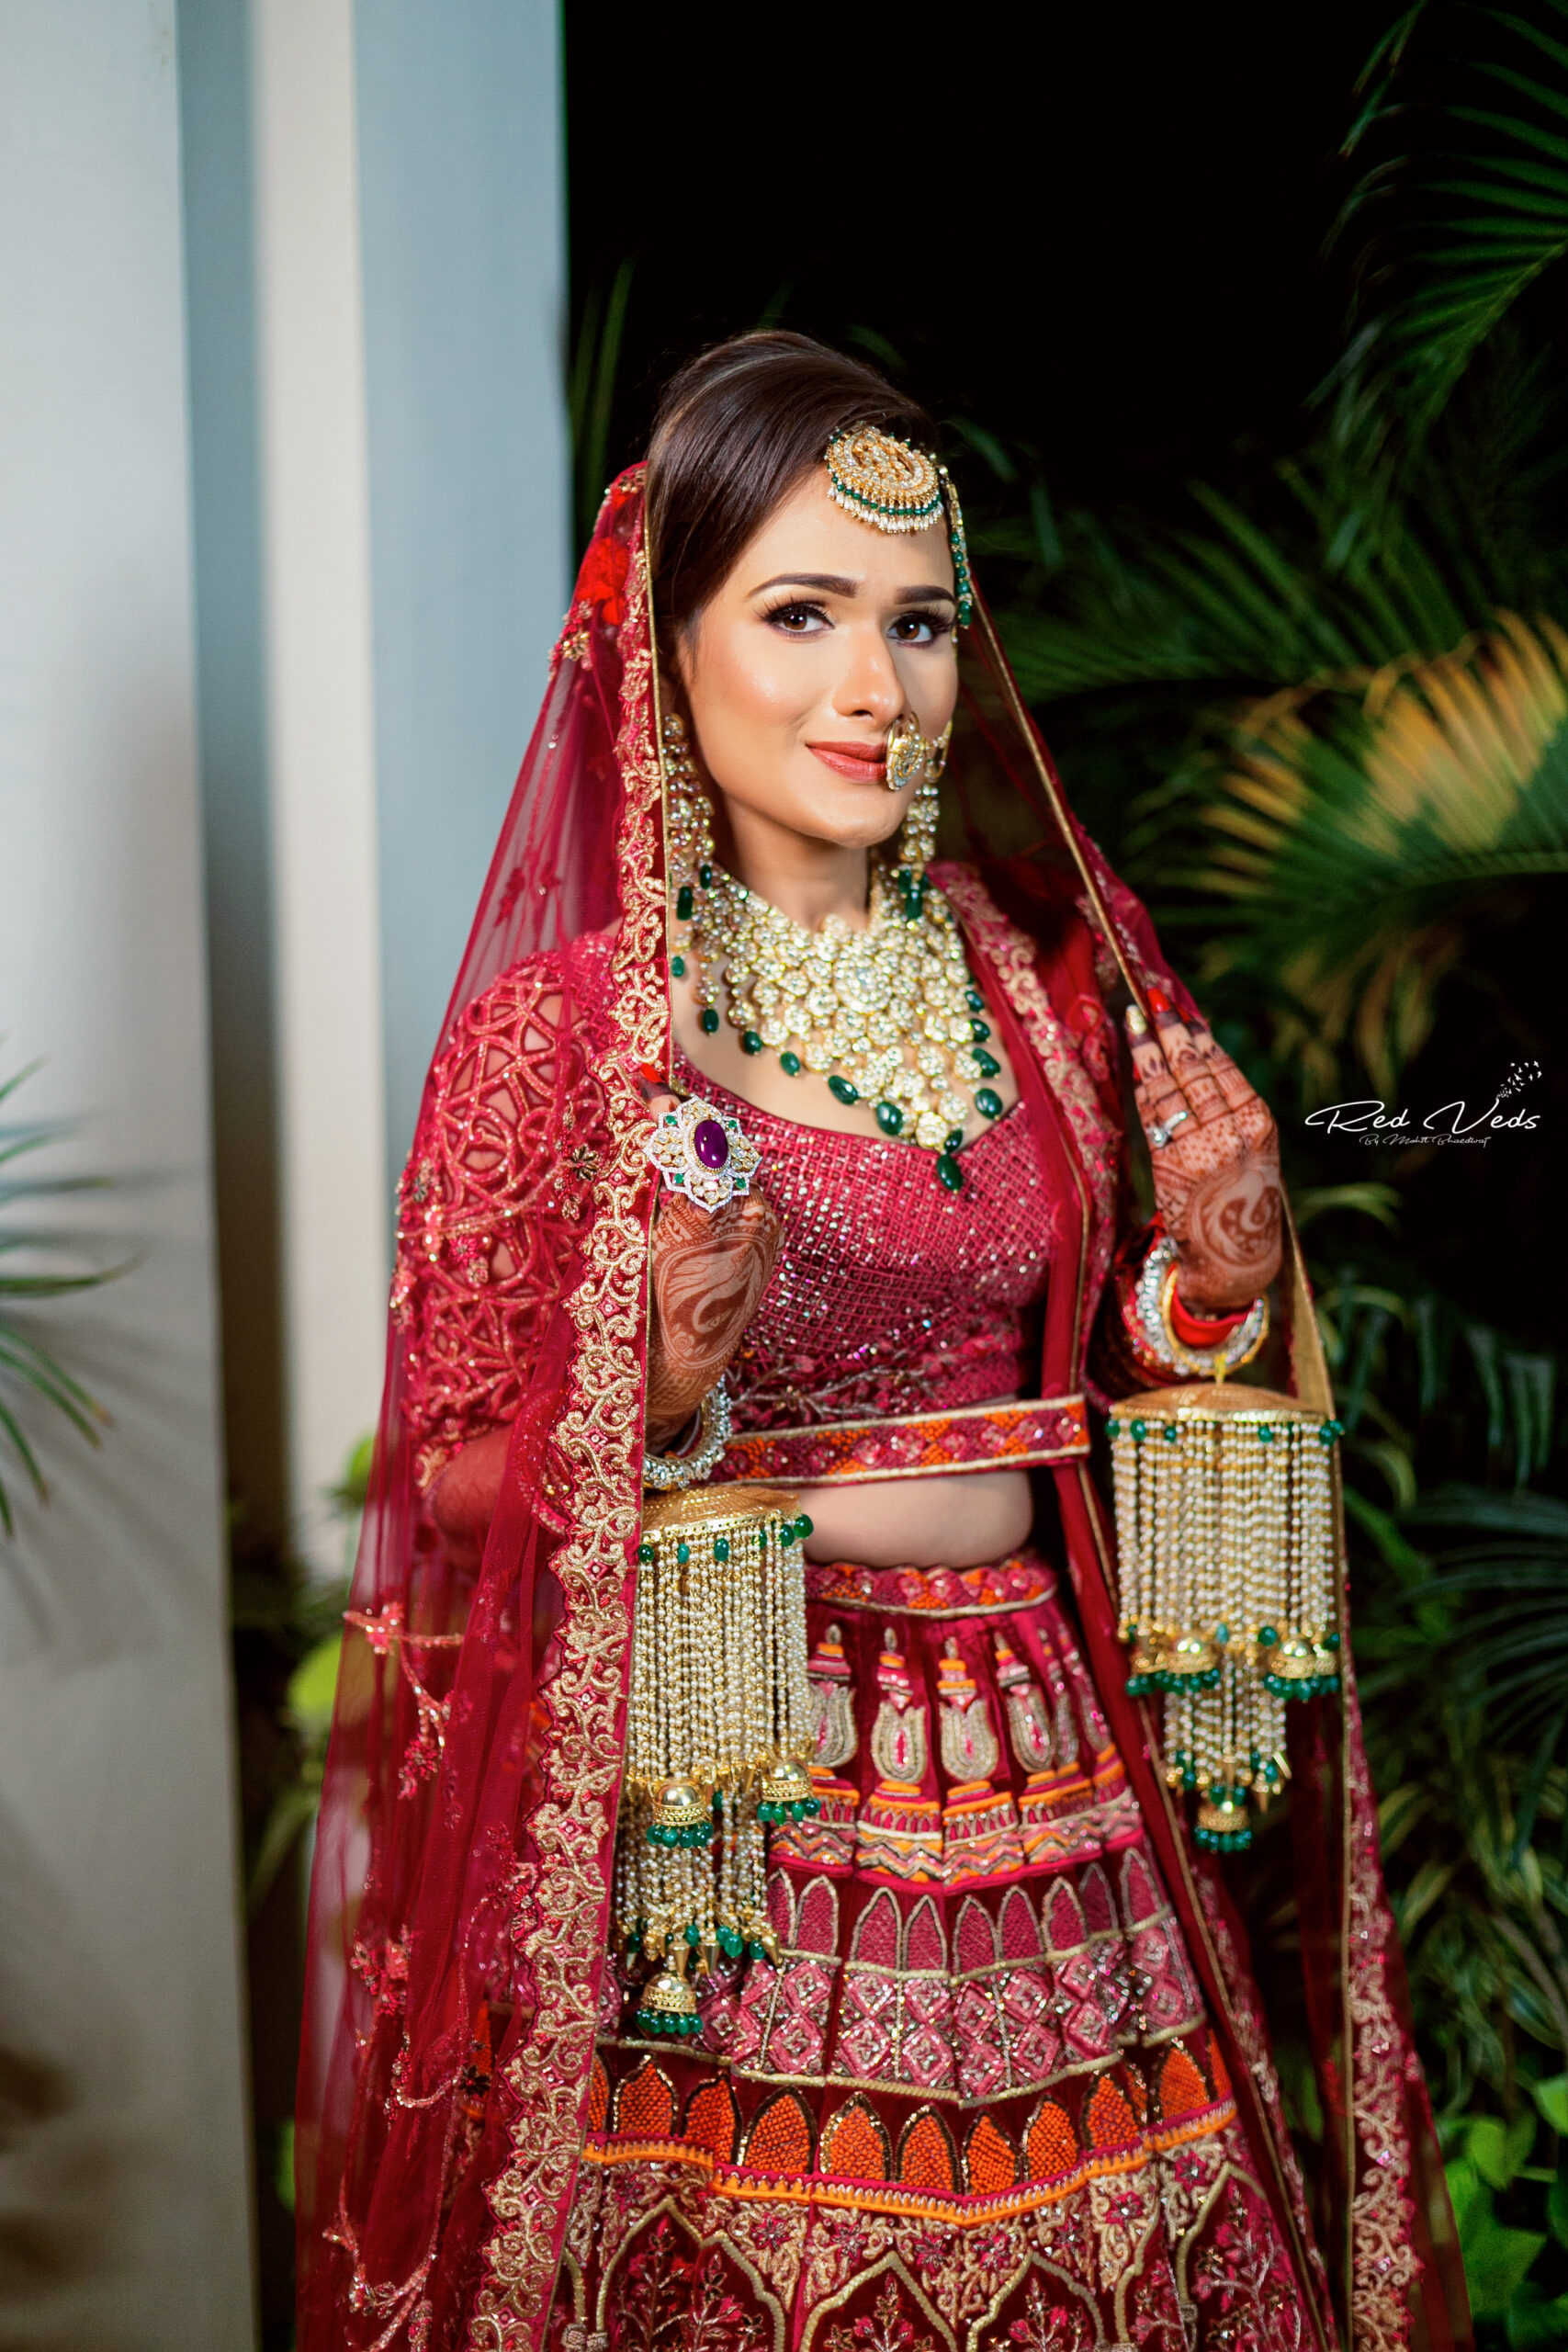 Top 7 Poses To Flaunt Your Jewellery At The Bridal Shoot